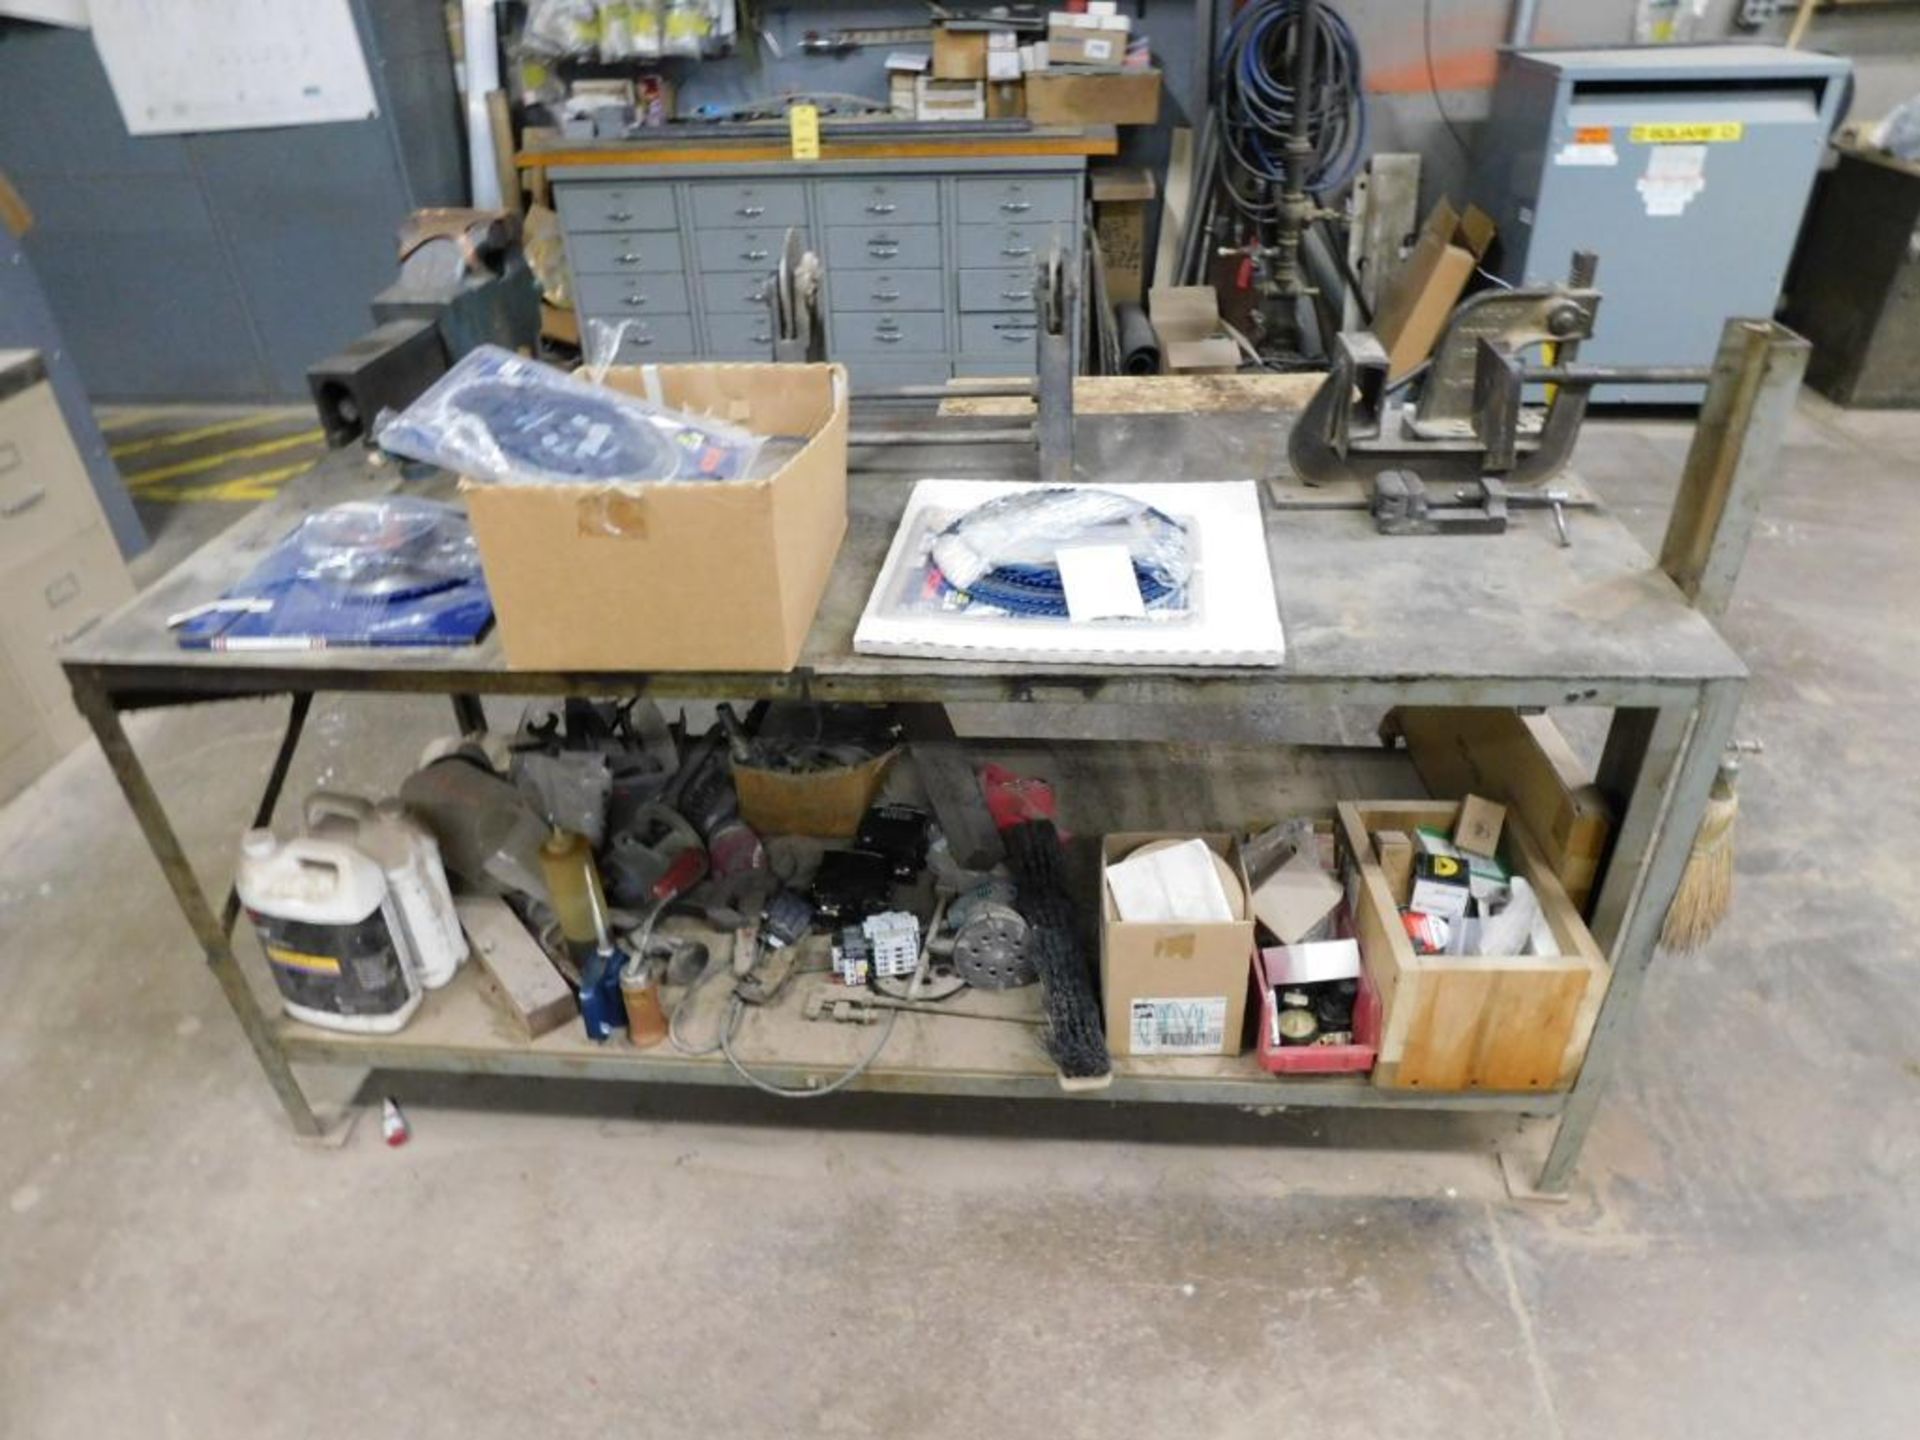 LOT: Fabrication Table w/6" Jaw Morgan Vise, Small Arbor Press, Balancing Stand, Assorted Saw Blades - Image 10 of 10